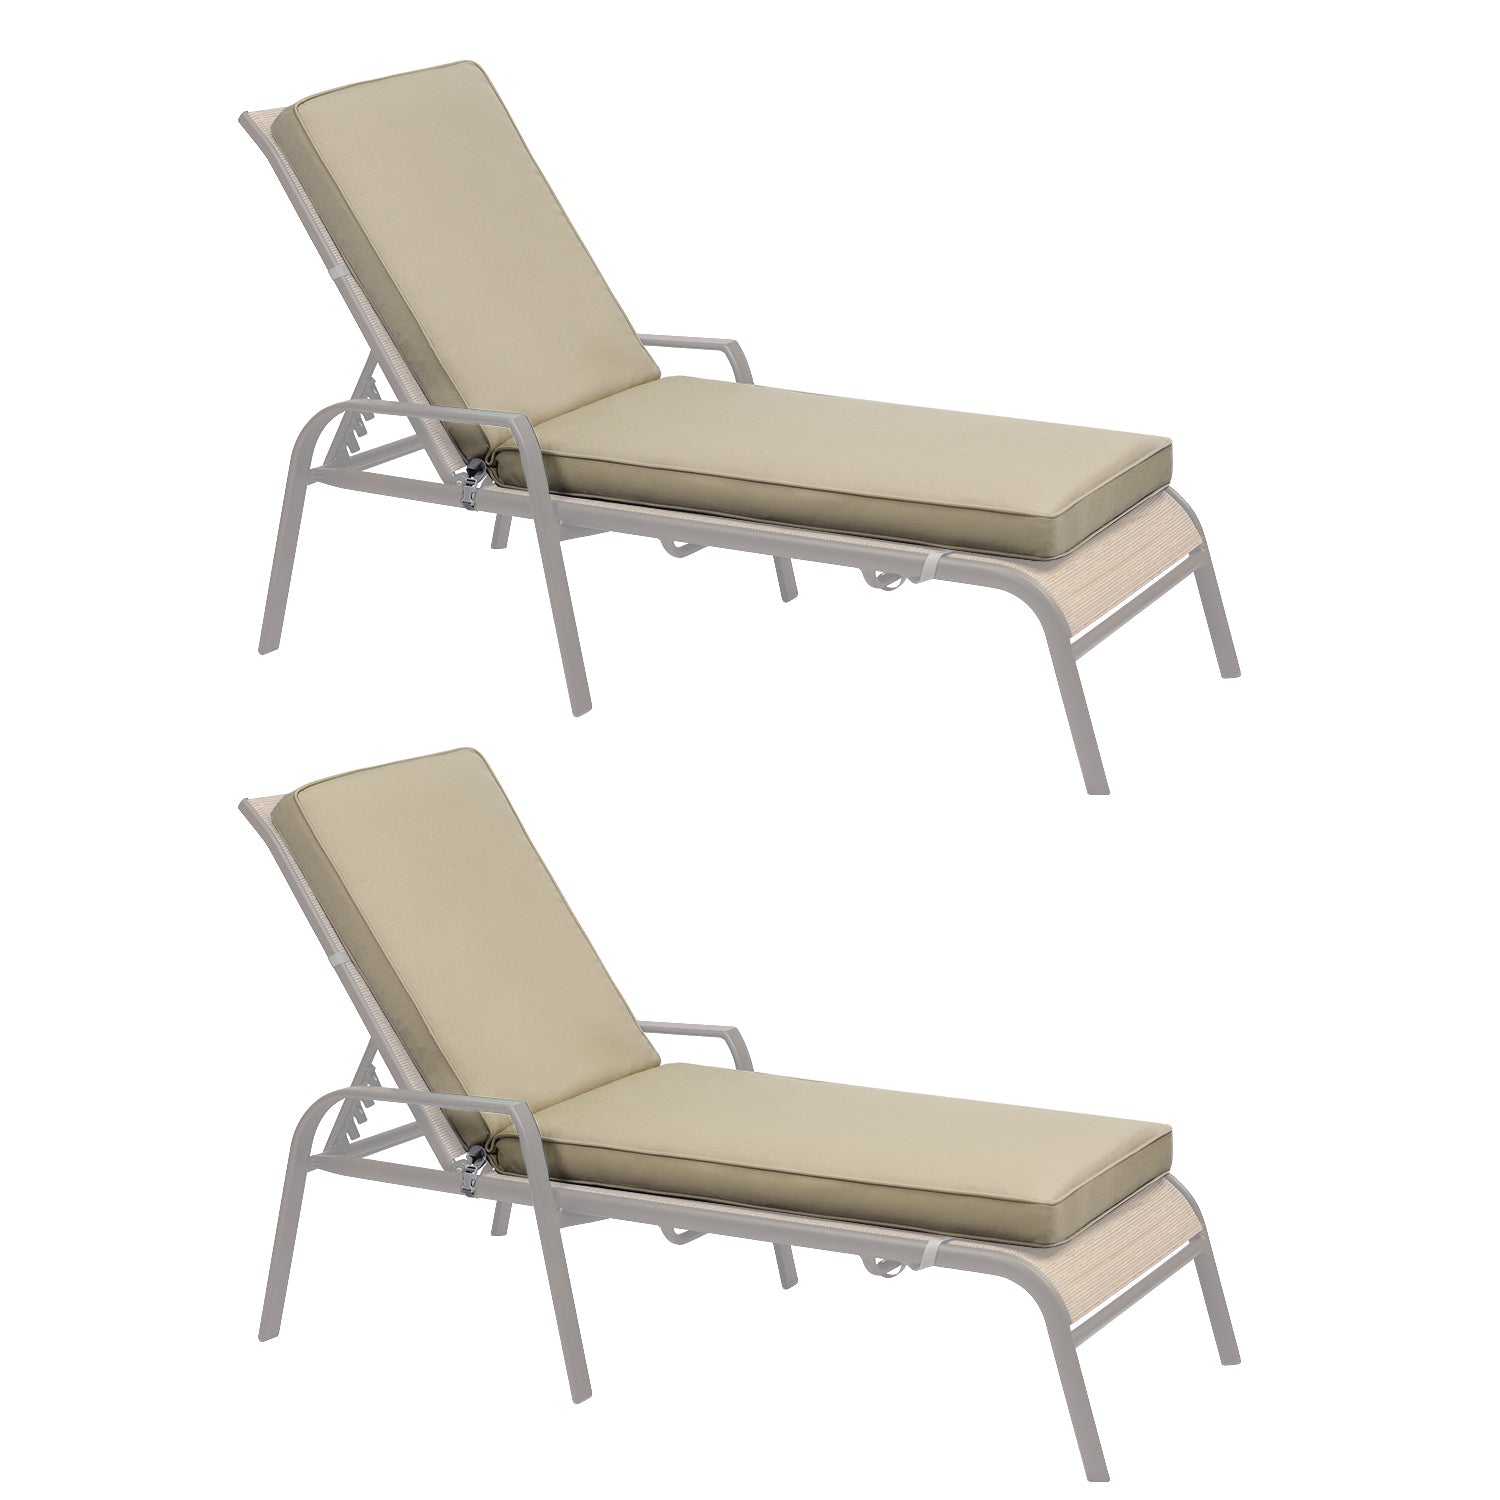 Patio Chaise Lounger Cushions Set of 2, Olefin Fabric, Water-Resistant, 72x21x3 Inches(Only Cushions) CUSHION Aoodor Brown  